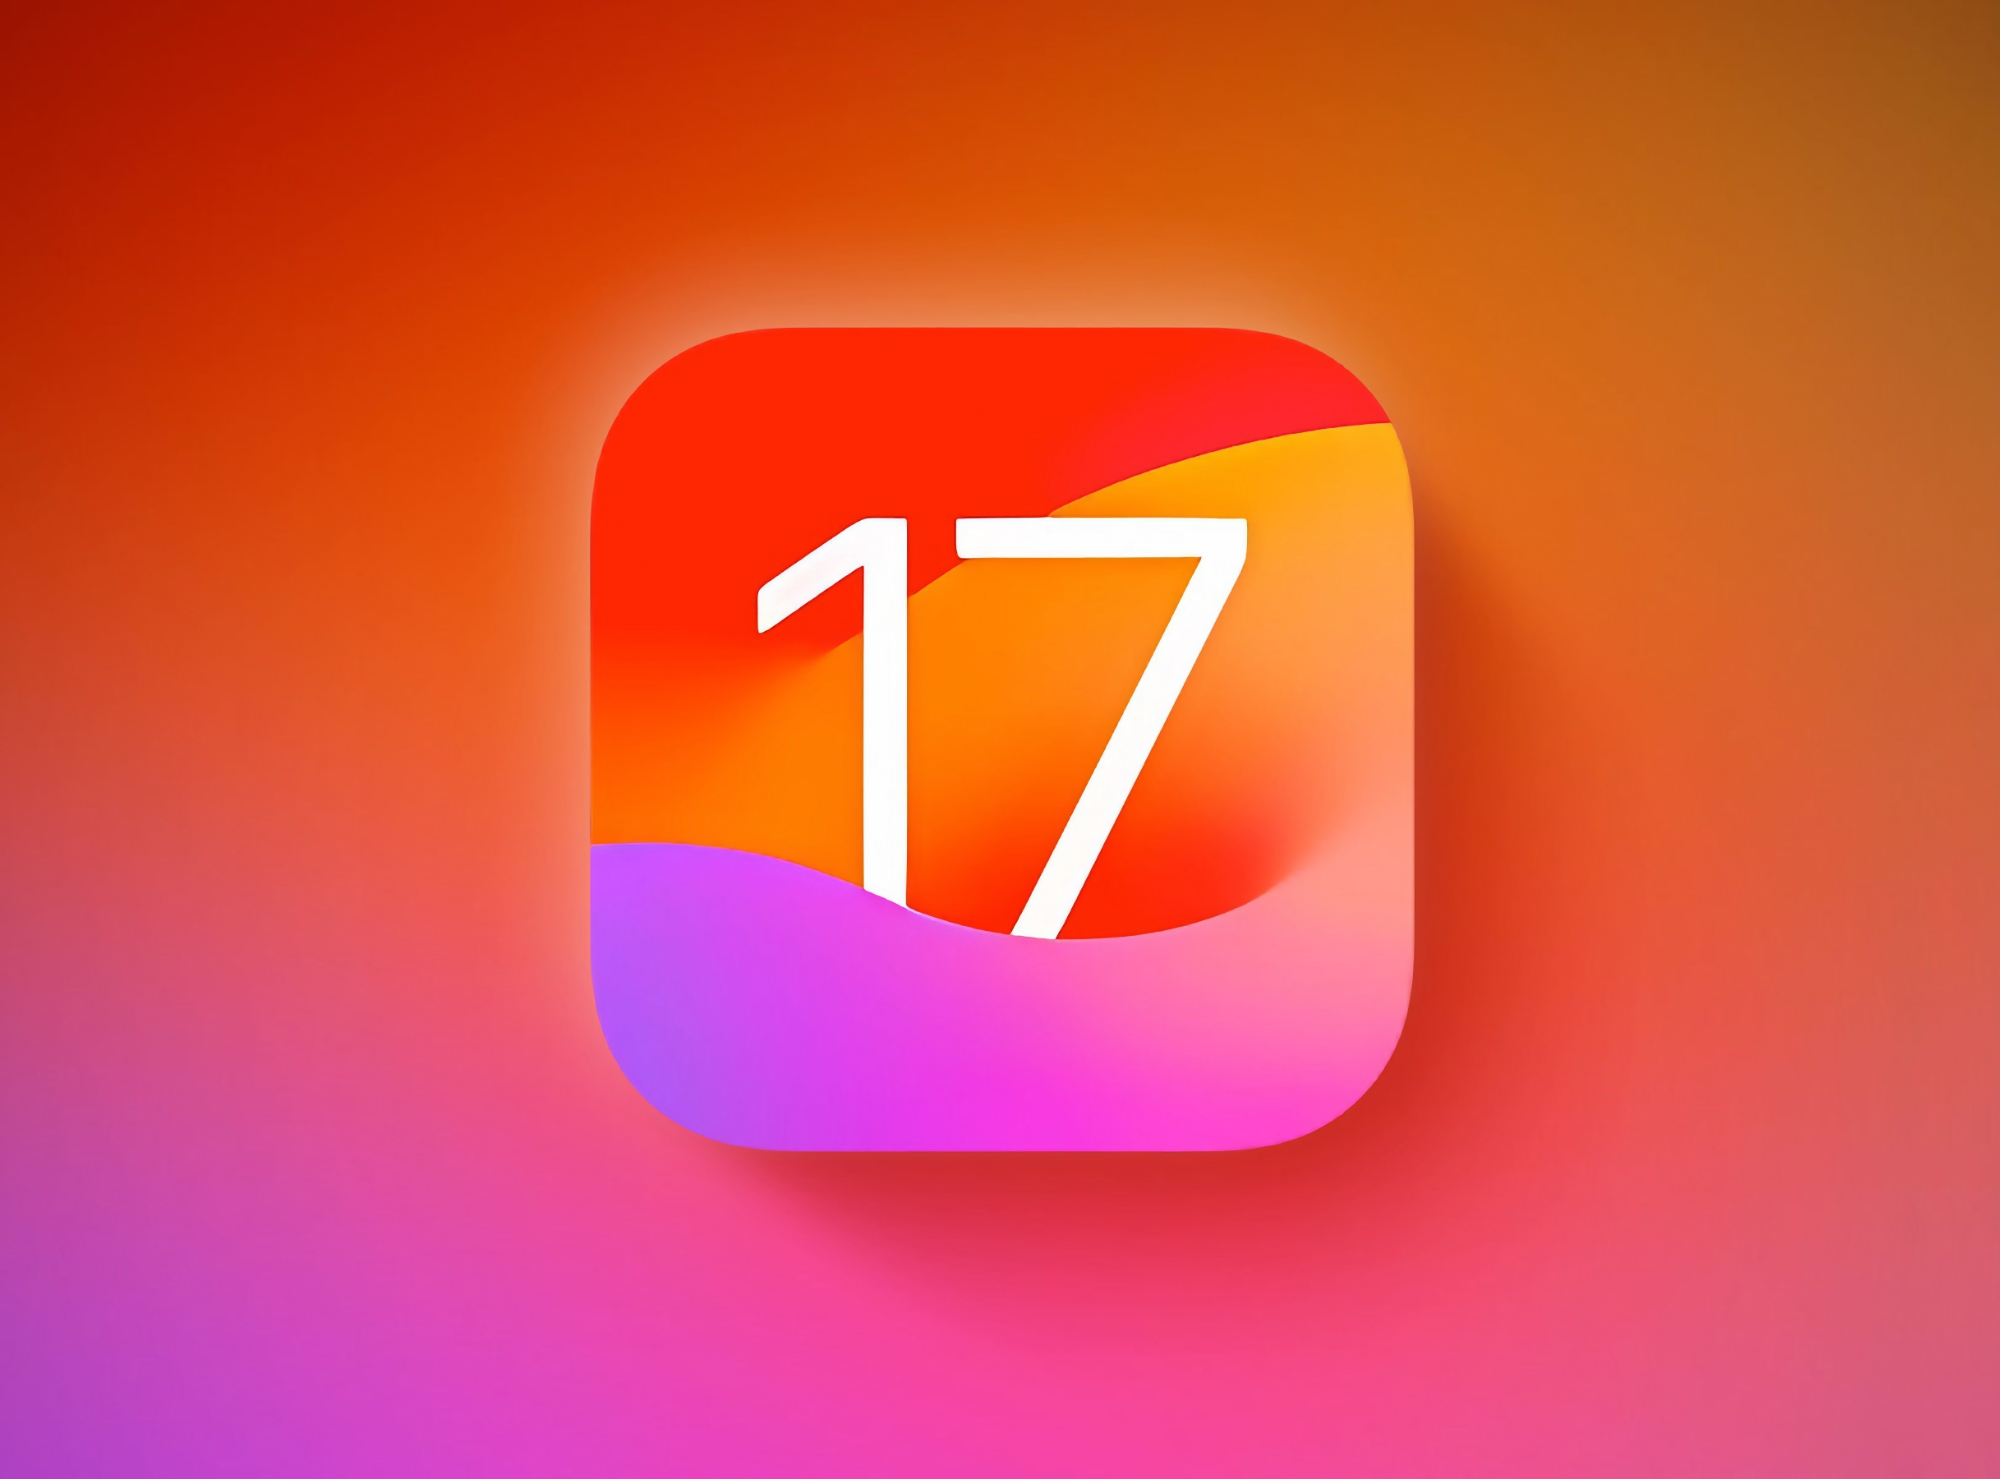 Apple has released iOS 17.0.1 and iOS 17.0.2 for iPhone users ...